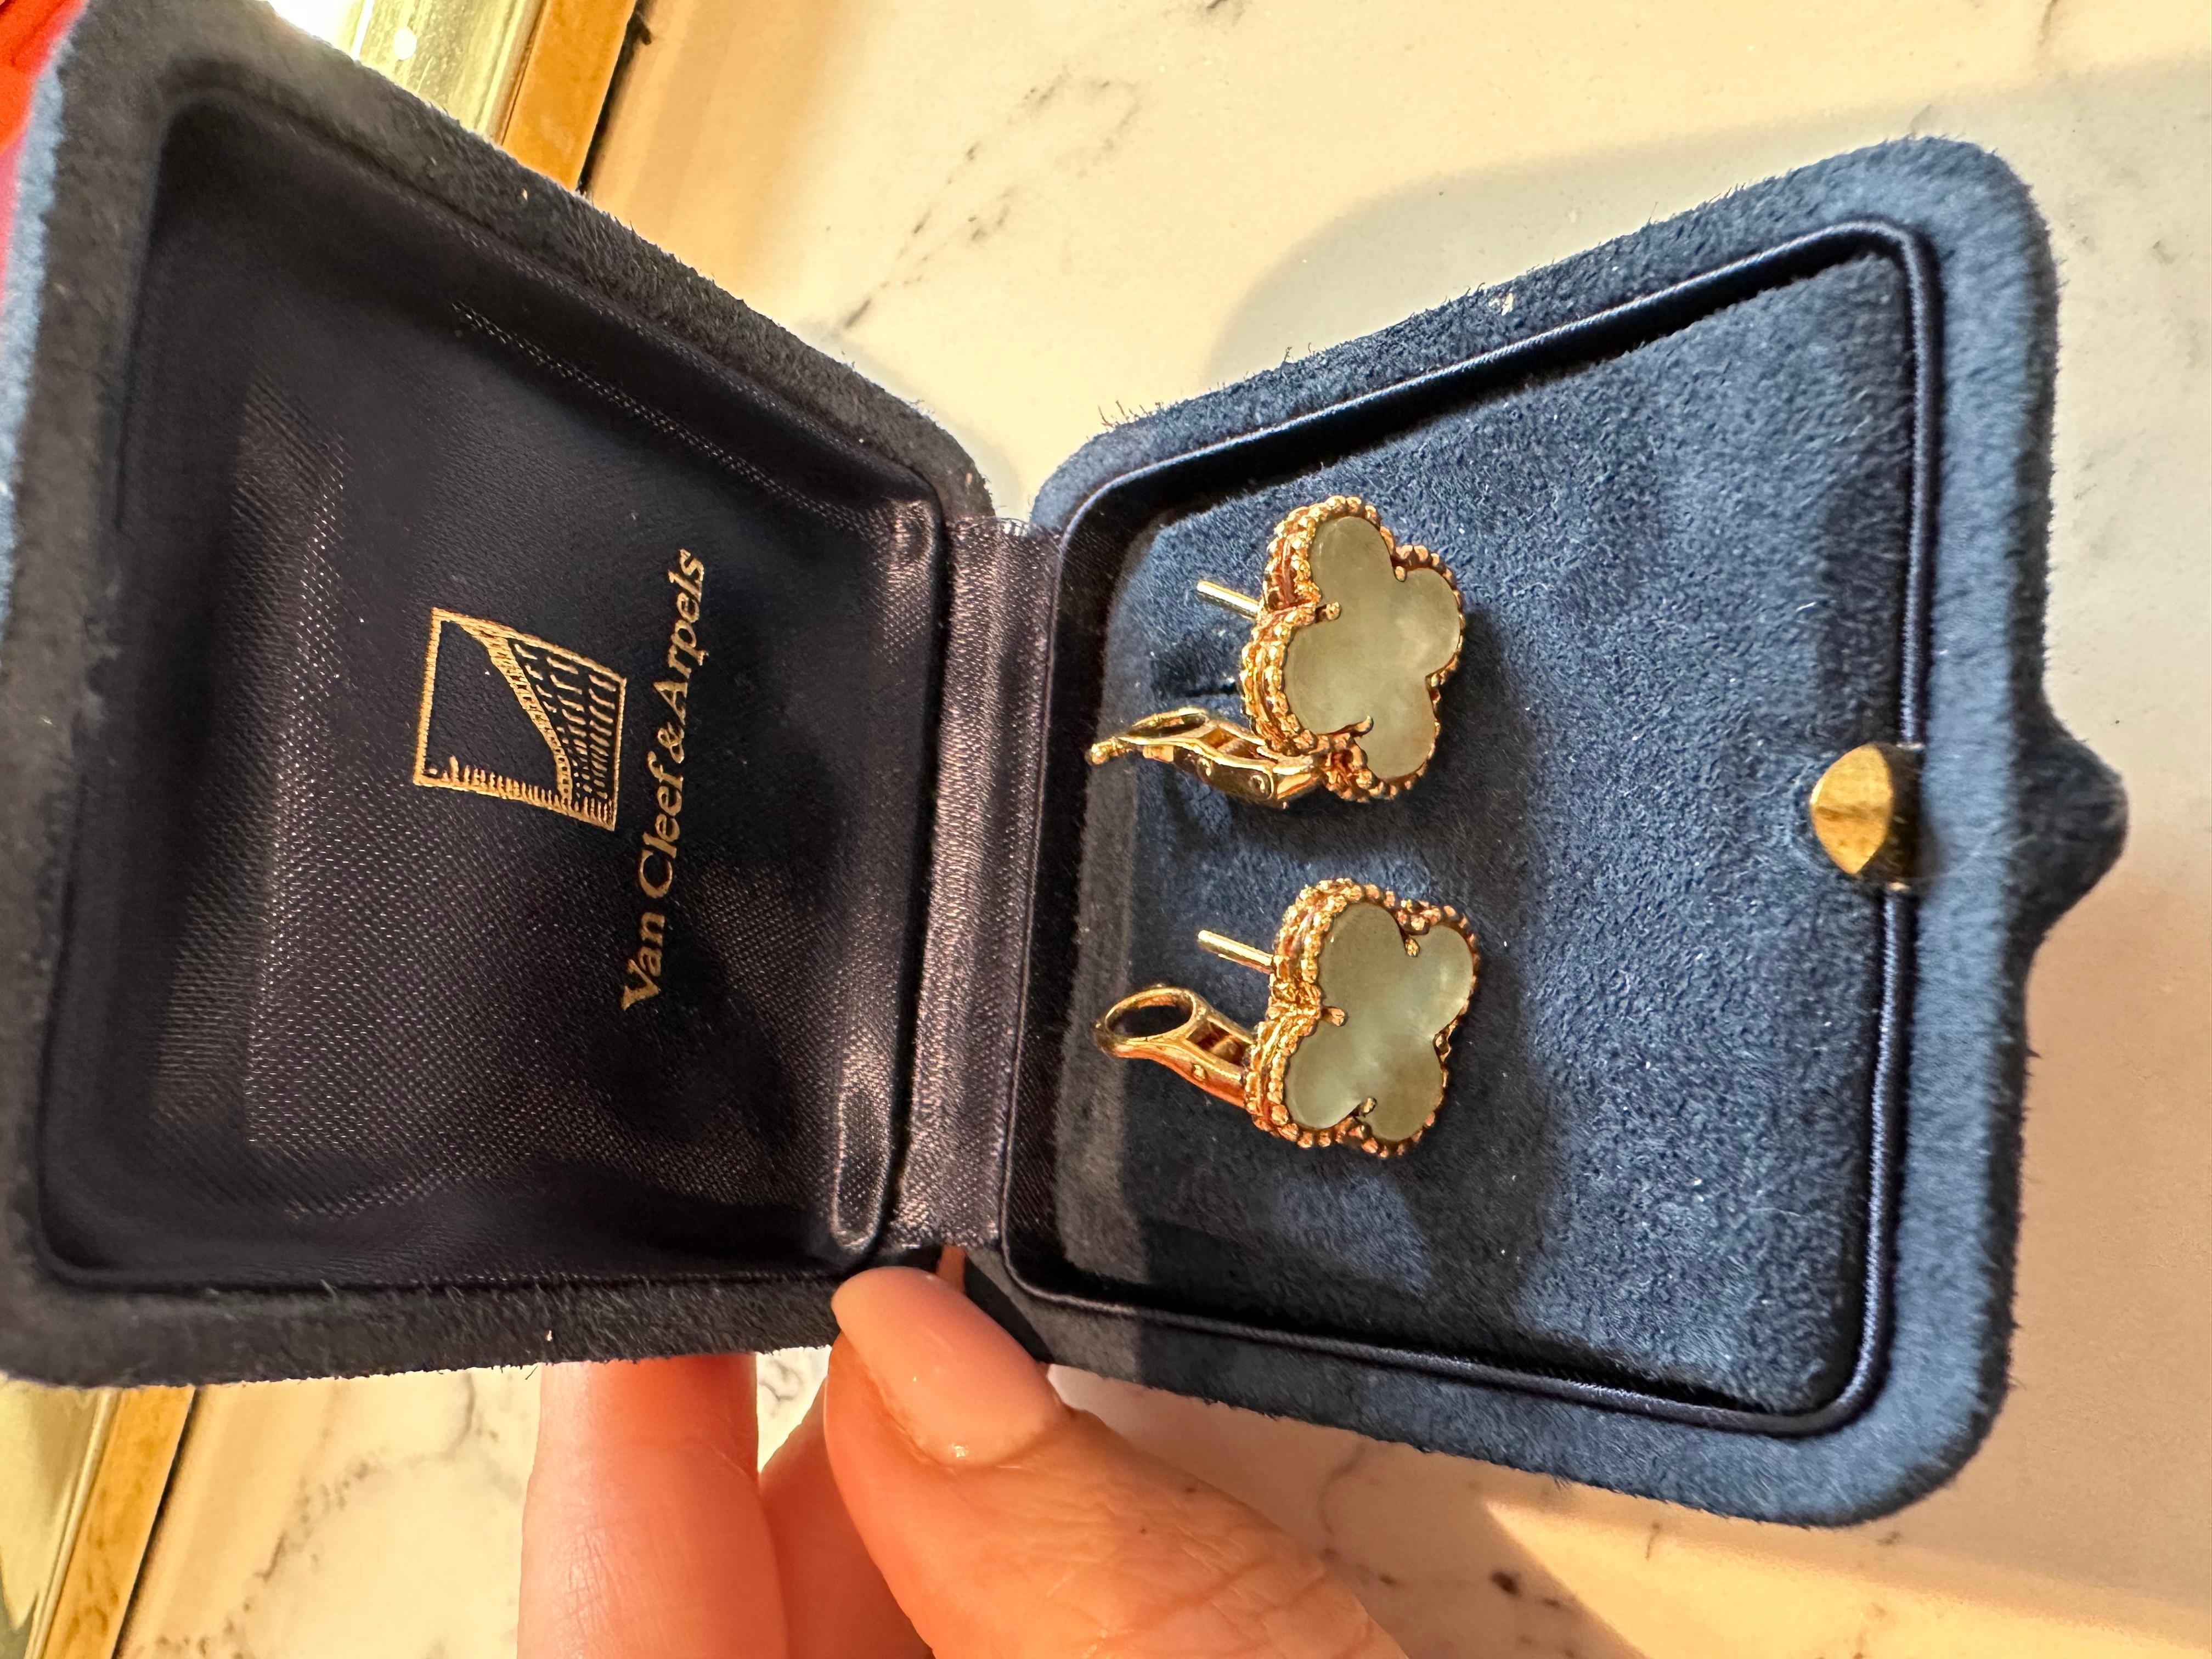 VAN CLEEF & ARPELS VINTAGE ALHAMBRA 18K GOLD JADE EARRINGS 
Van Cleef and Arpels earrings from the Vintage Alhambra collection feature jade set in 18K gold. 
The Jade gemstone makes it so rare and valuable.  Measure 14.7mm x 14.4mm. Marked VCA, 750.